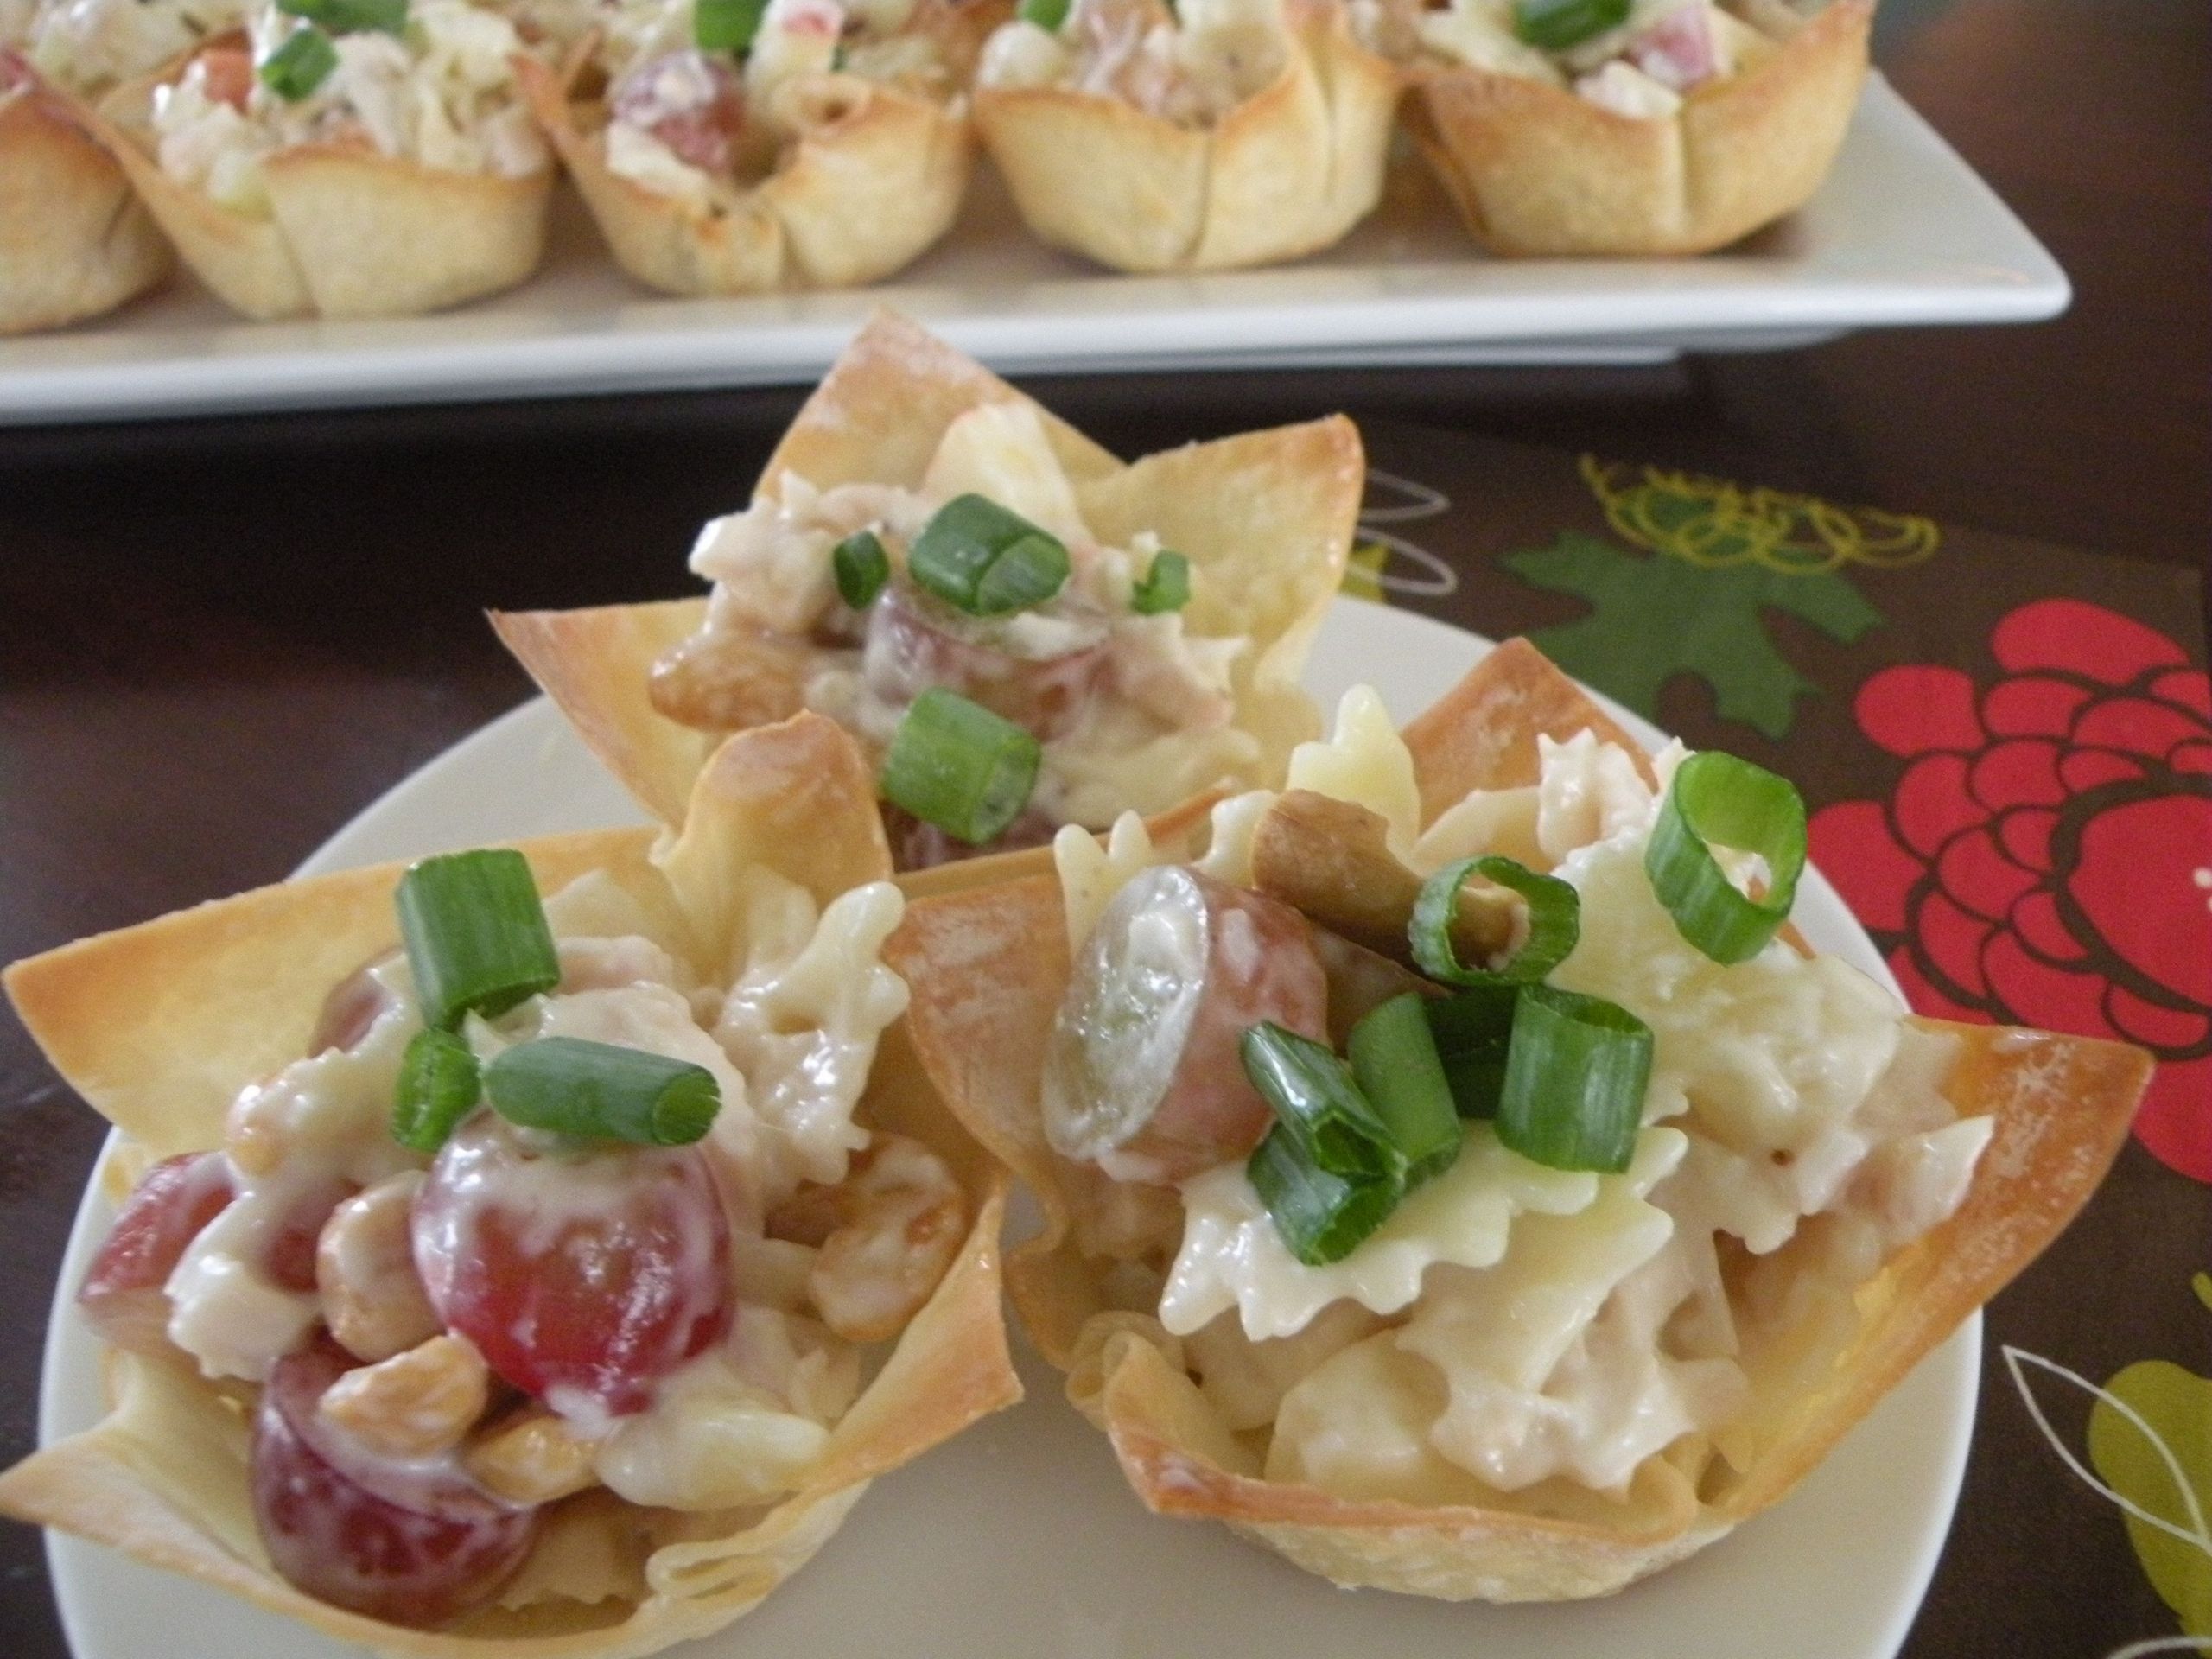 Chicken Salad Appetizers
 use wonton wrappers for mini bowls and fill with any